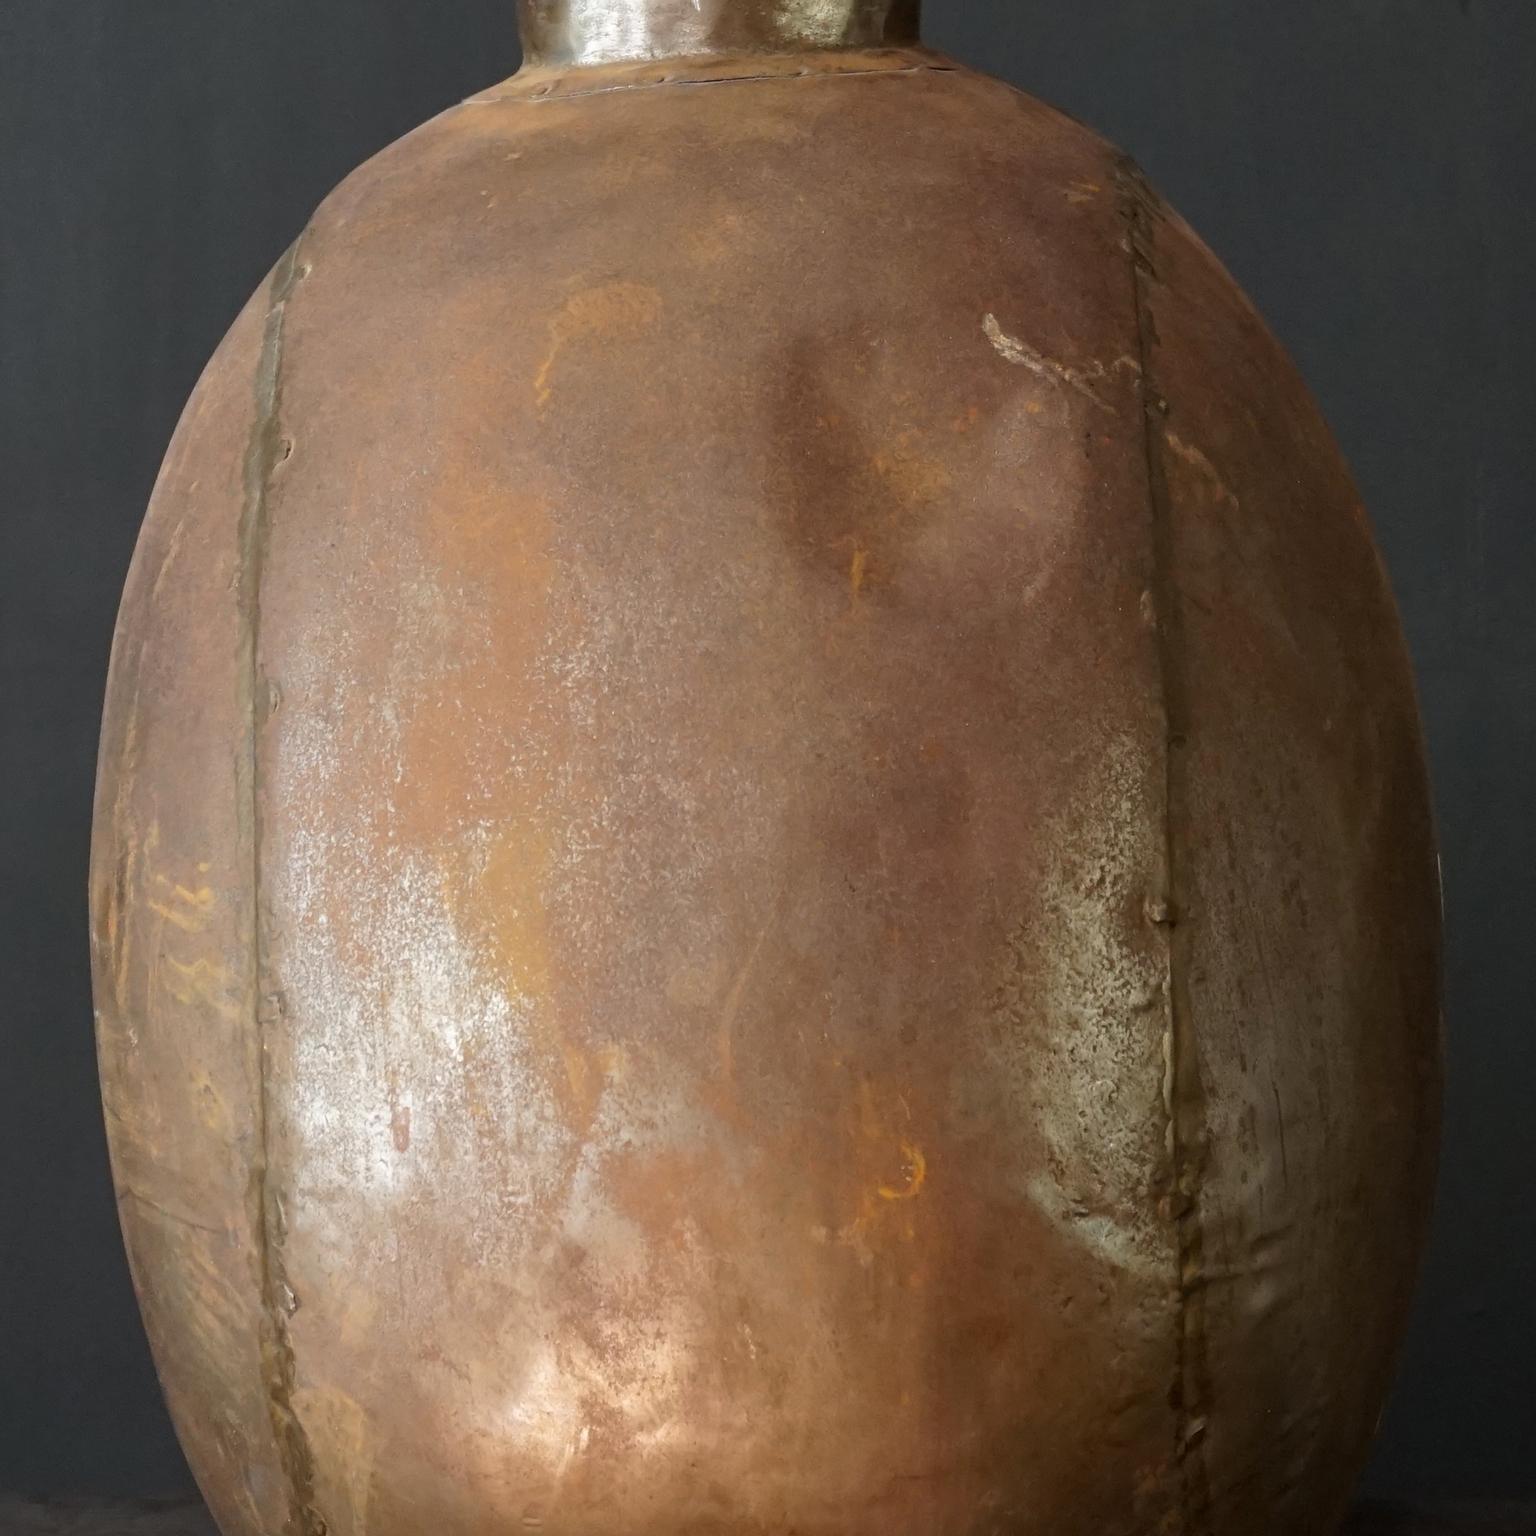 1950s Indian Hand-Hammered Large Metal Water Jug or Bottle with Wooden Cork For Sale 6